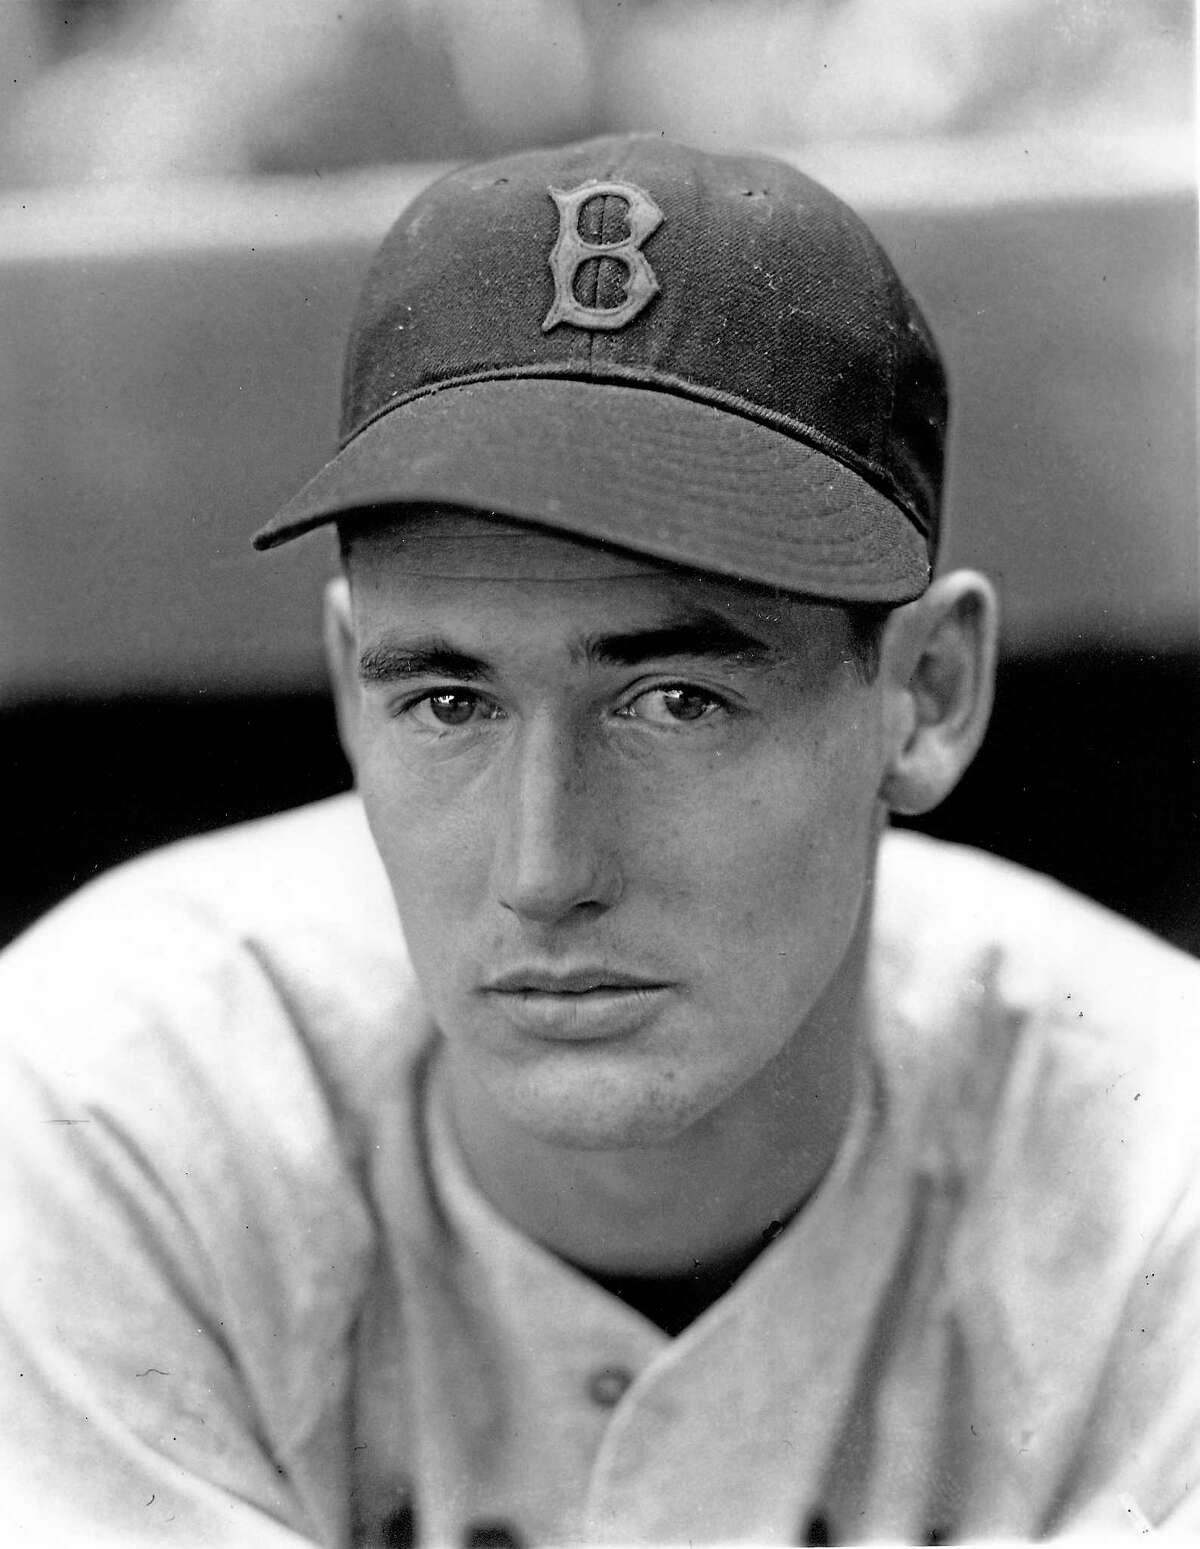 Boston Red Sox outfielder Ted Williams.